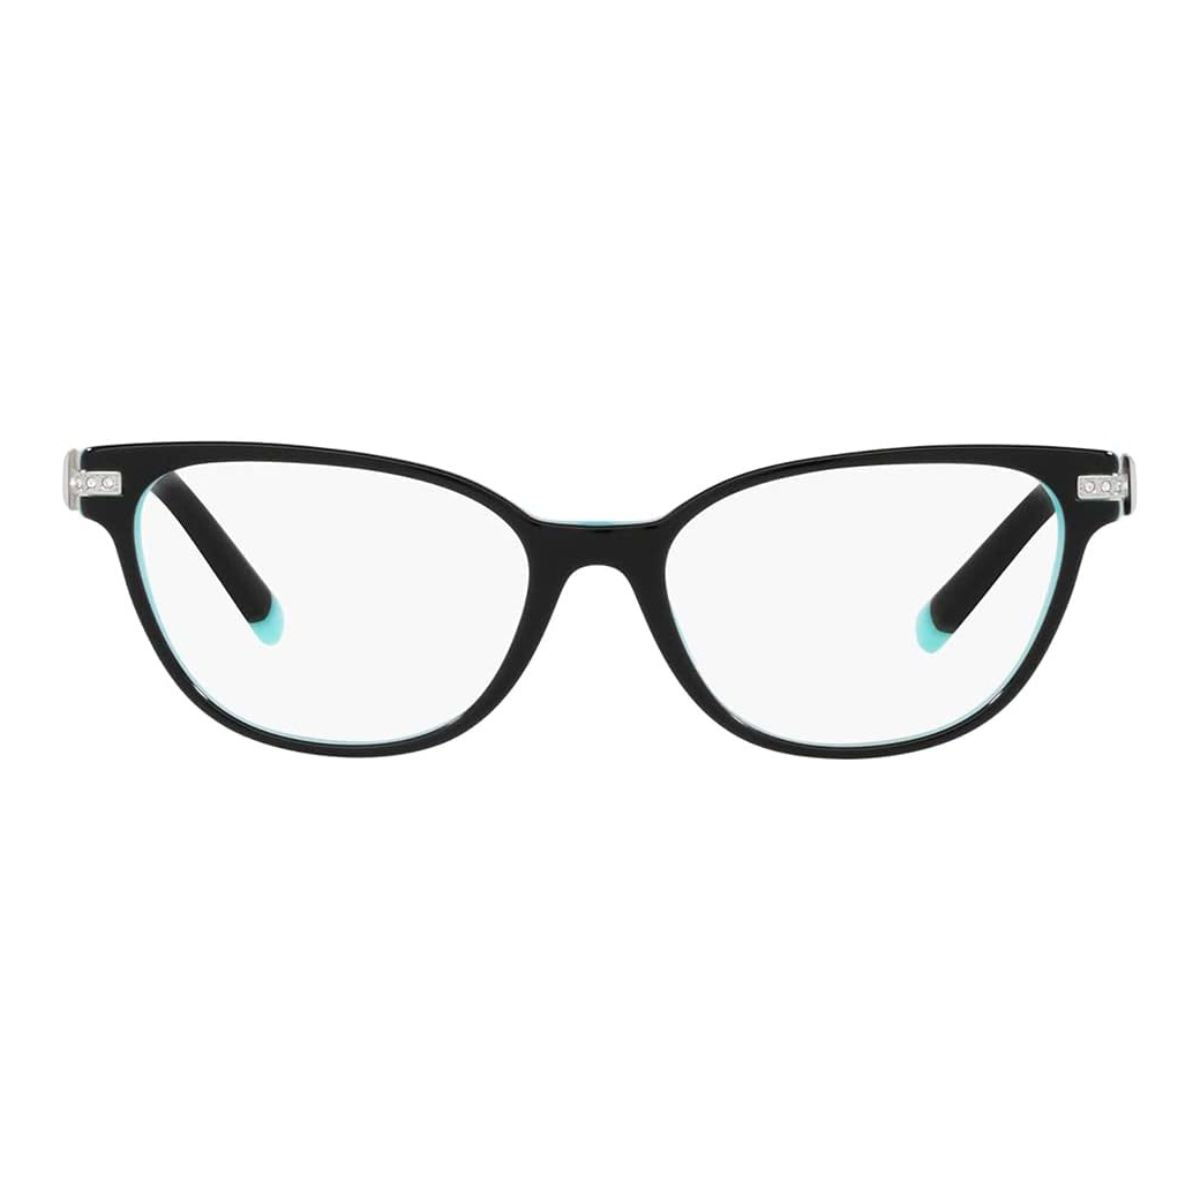 "buy Tiffany And Co 2223-B 8055 cat eye glasses frame for women's online at optorium"